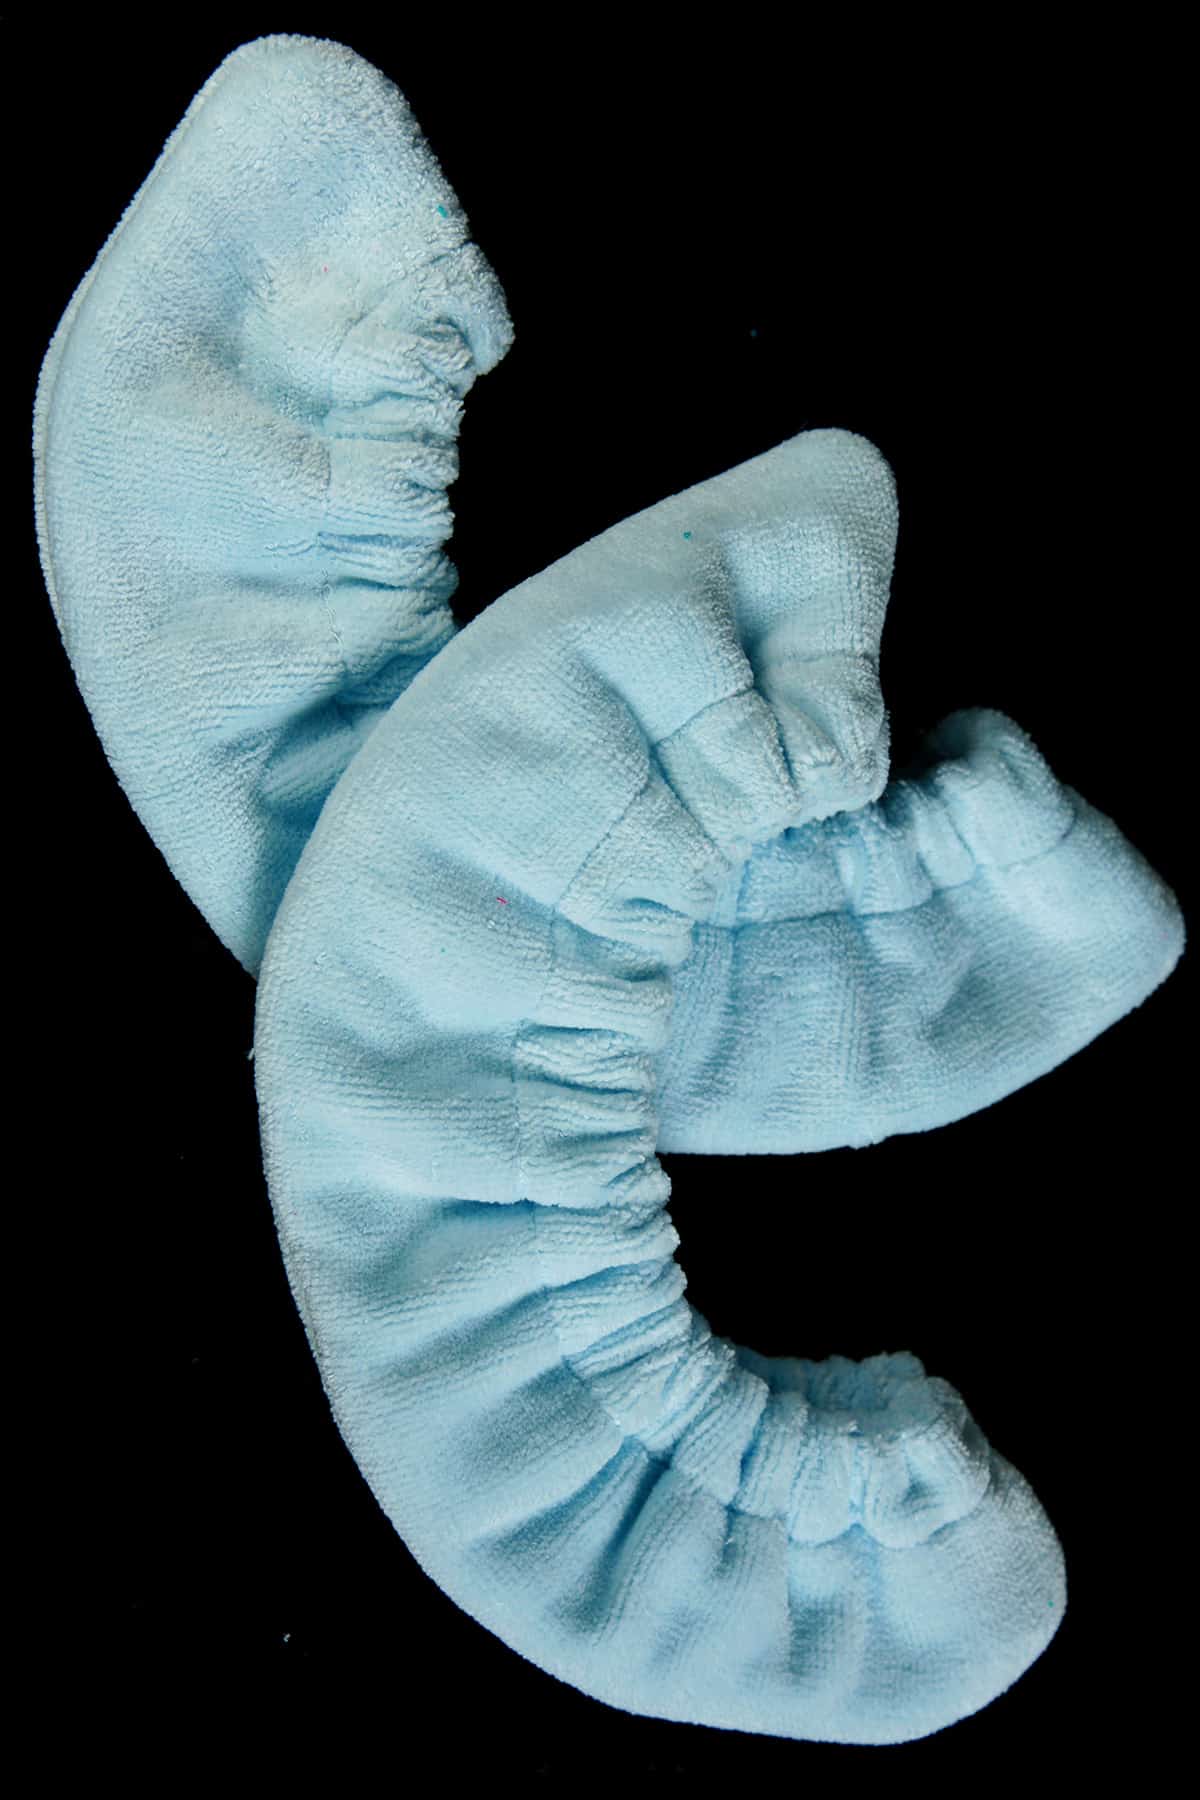 A pair of light blue terrycloth soakers against a black background.